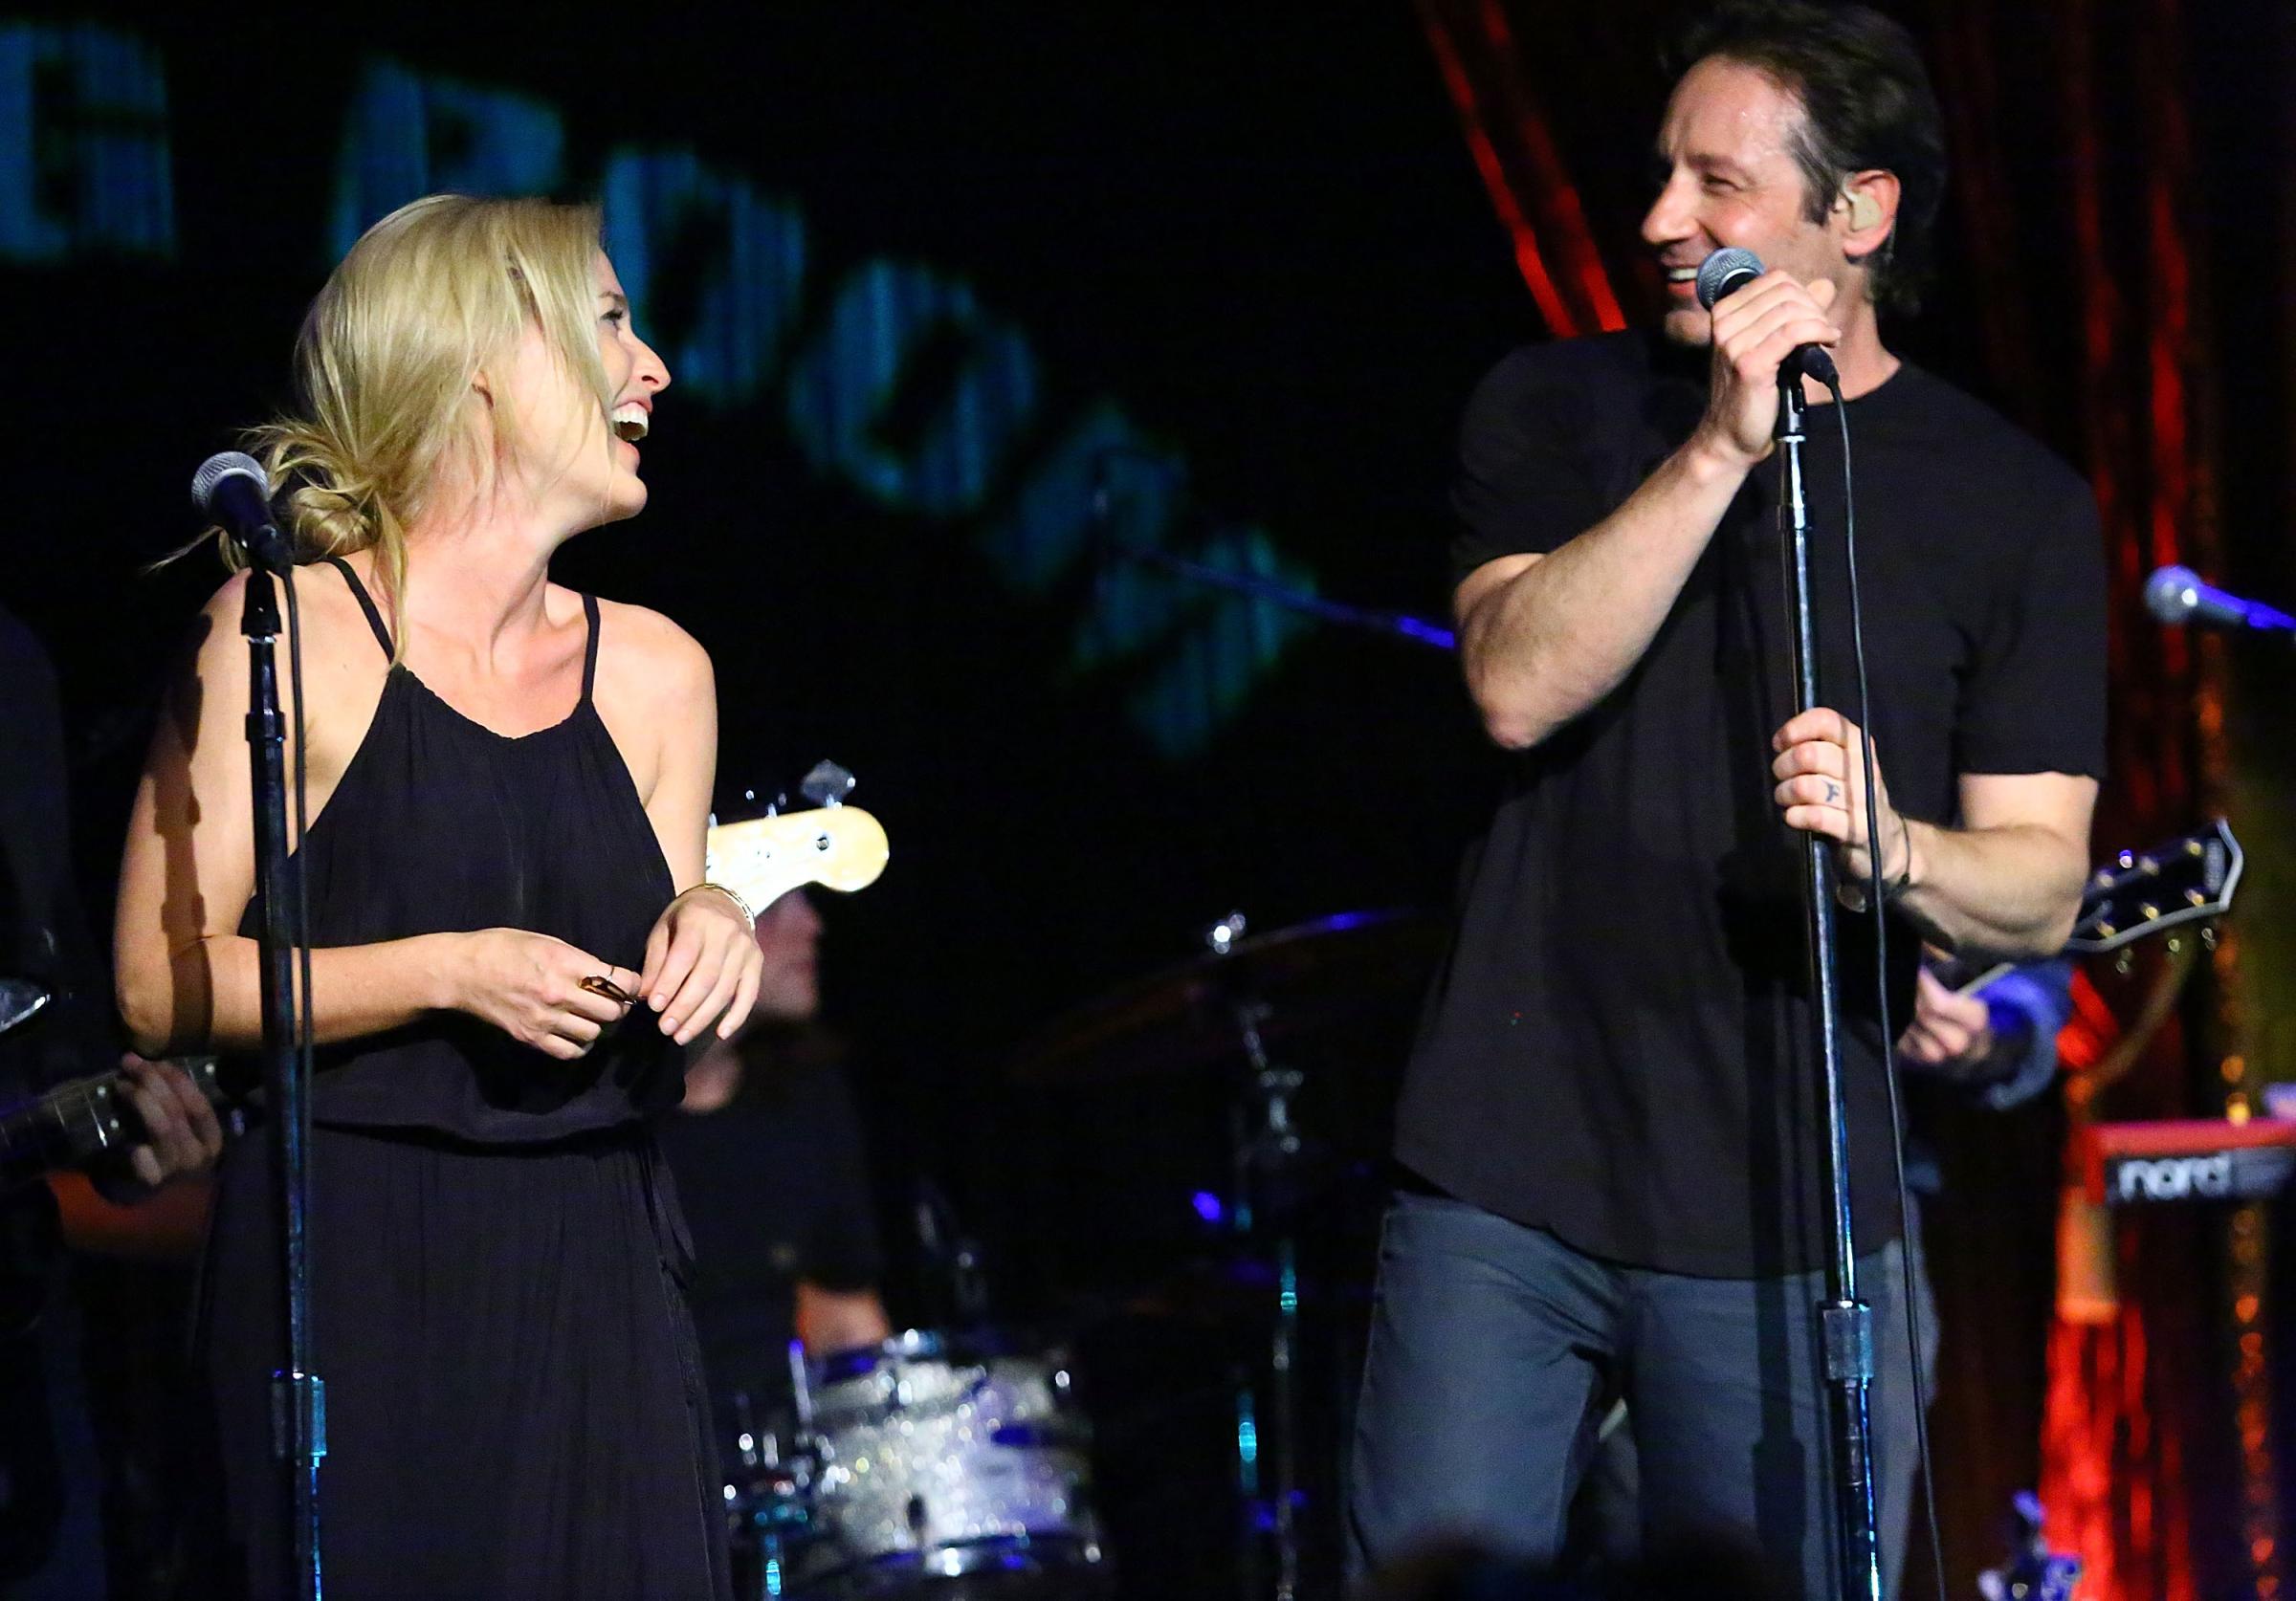 Gillian Anderson and David Duchovny perform at The Cutting Room in New York City on May 12, 2015.